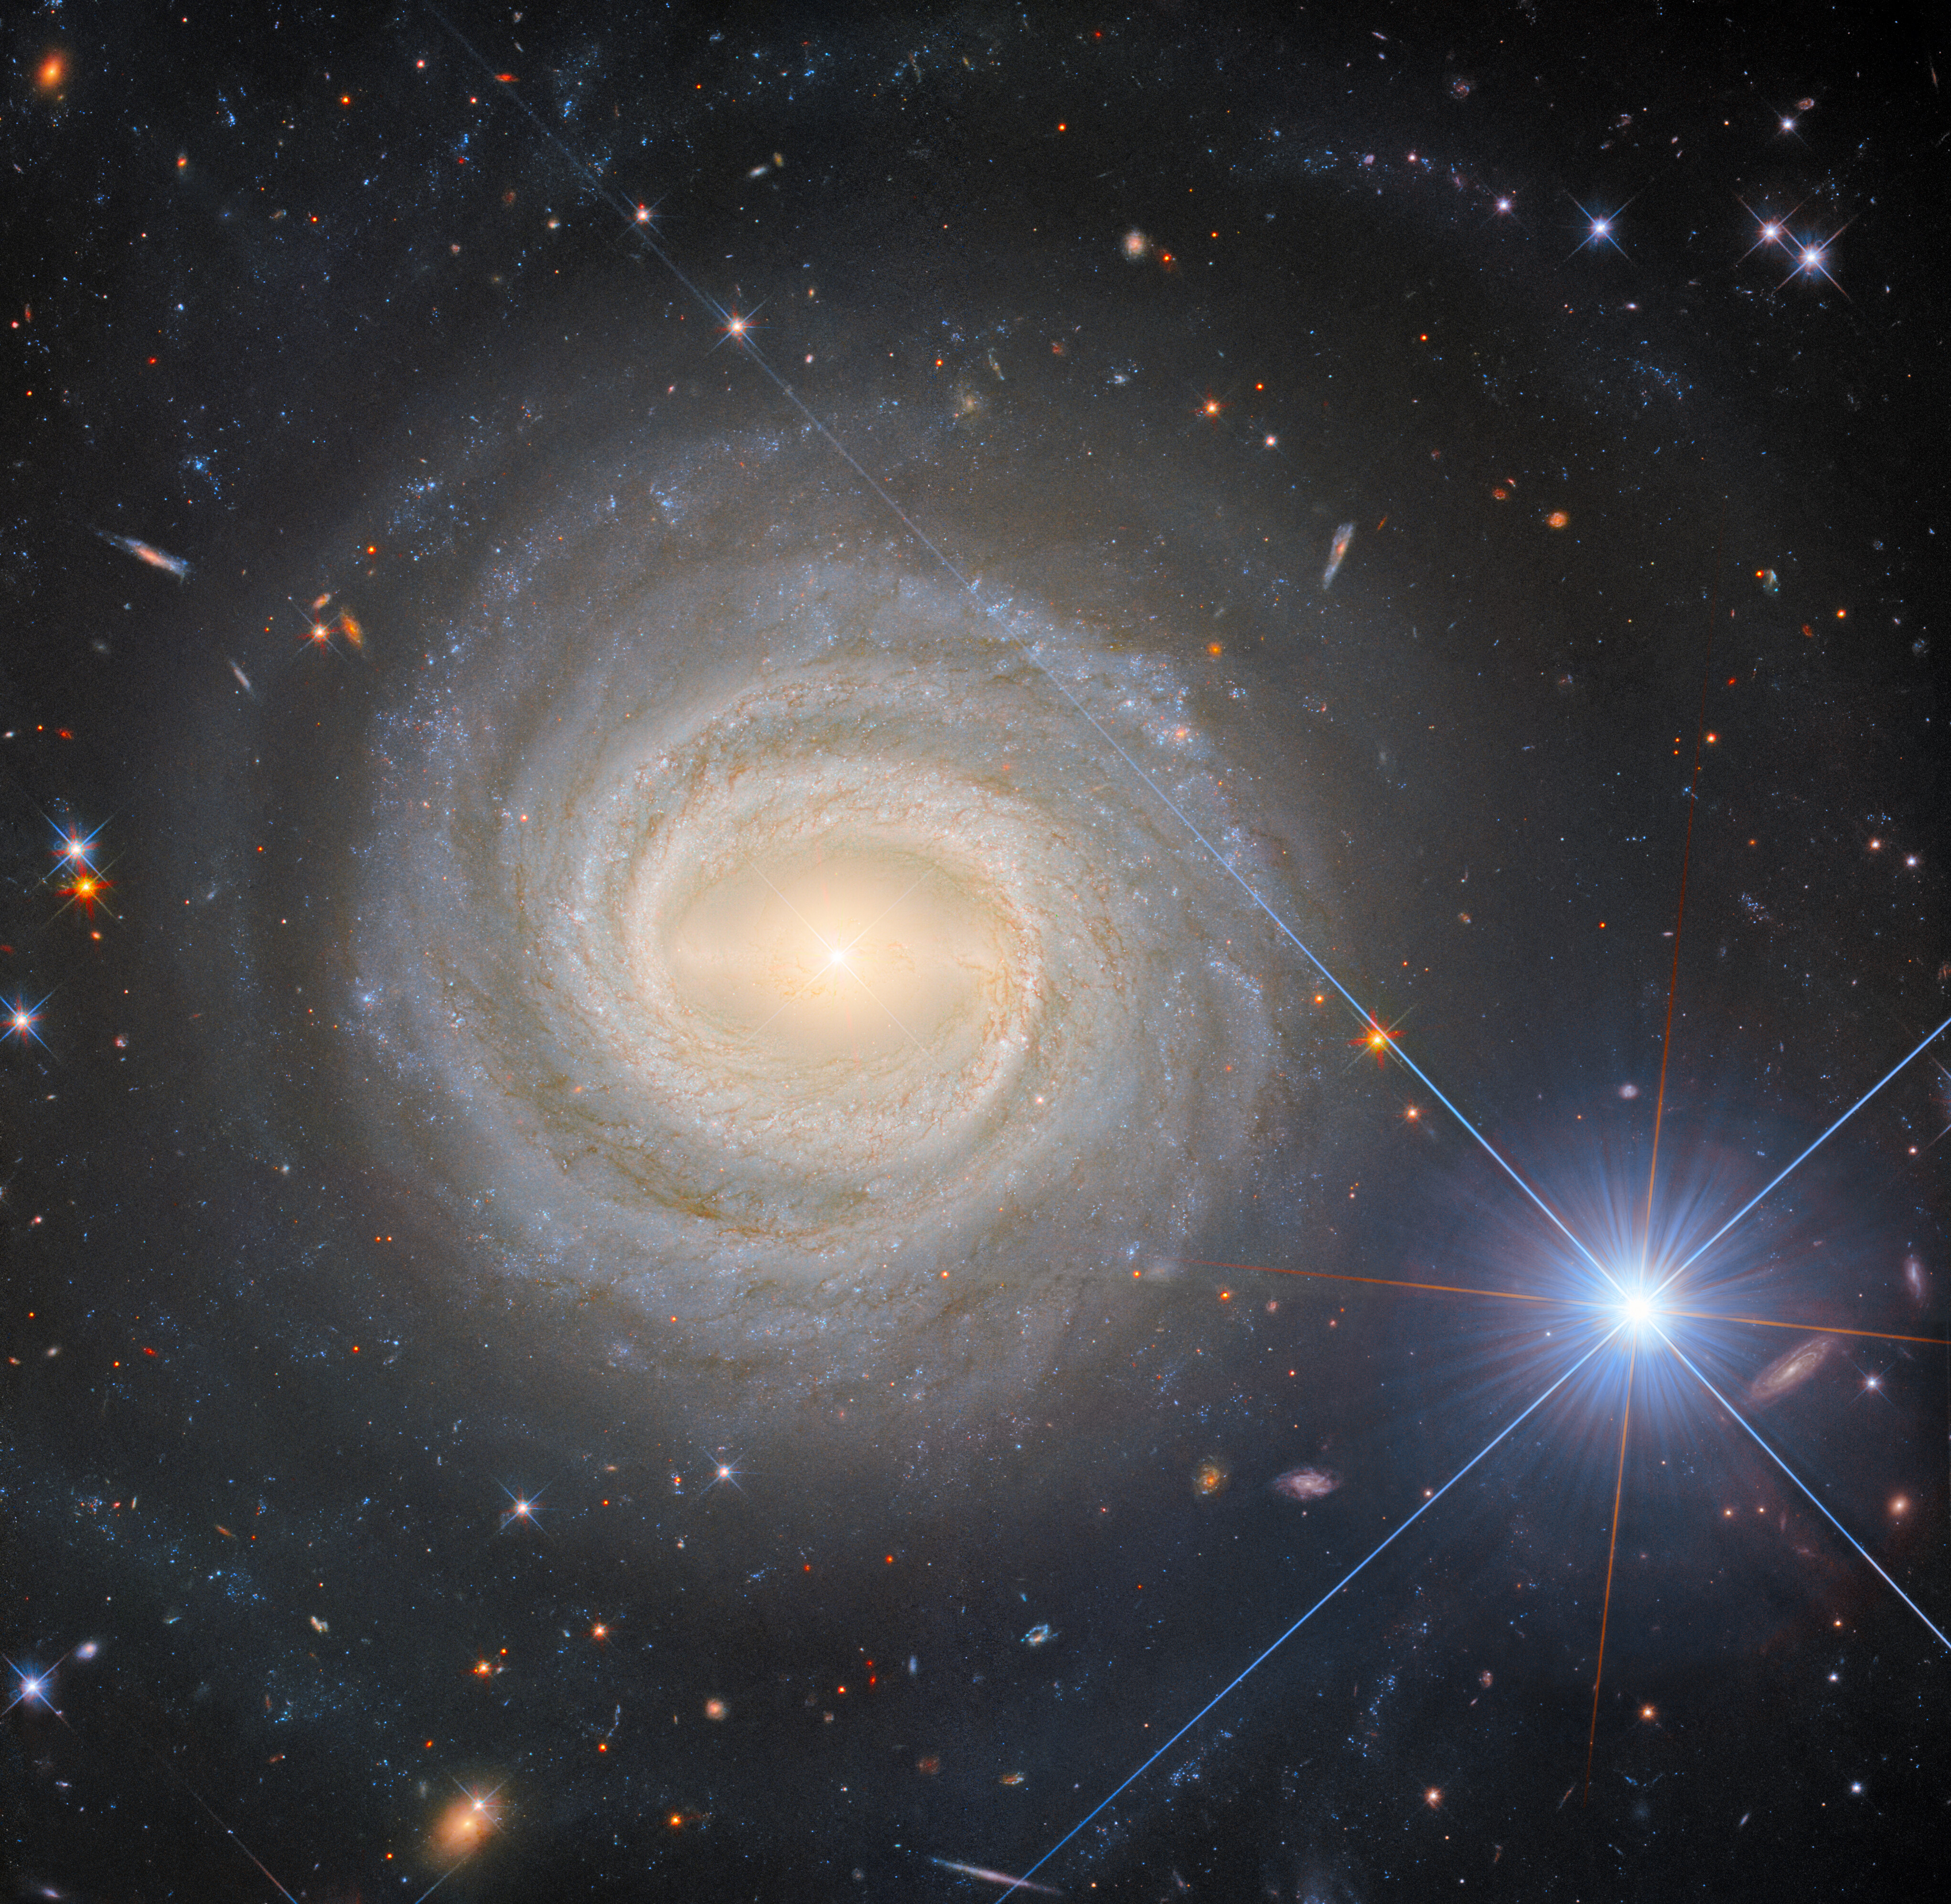 A spiral galaxy, seen face-on to the viewer. The bright center of the galaxy is crossed by a glowing bar, and it is surrounded by tightly wound spiral arms, forming a circular shape with relatively clear edges. Faraway galaxies are visible around it, along with a few bright stars, on a dark background. One star to the right of the galaxy is very large and extremely bright with long diffraction spikes.